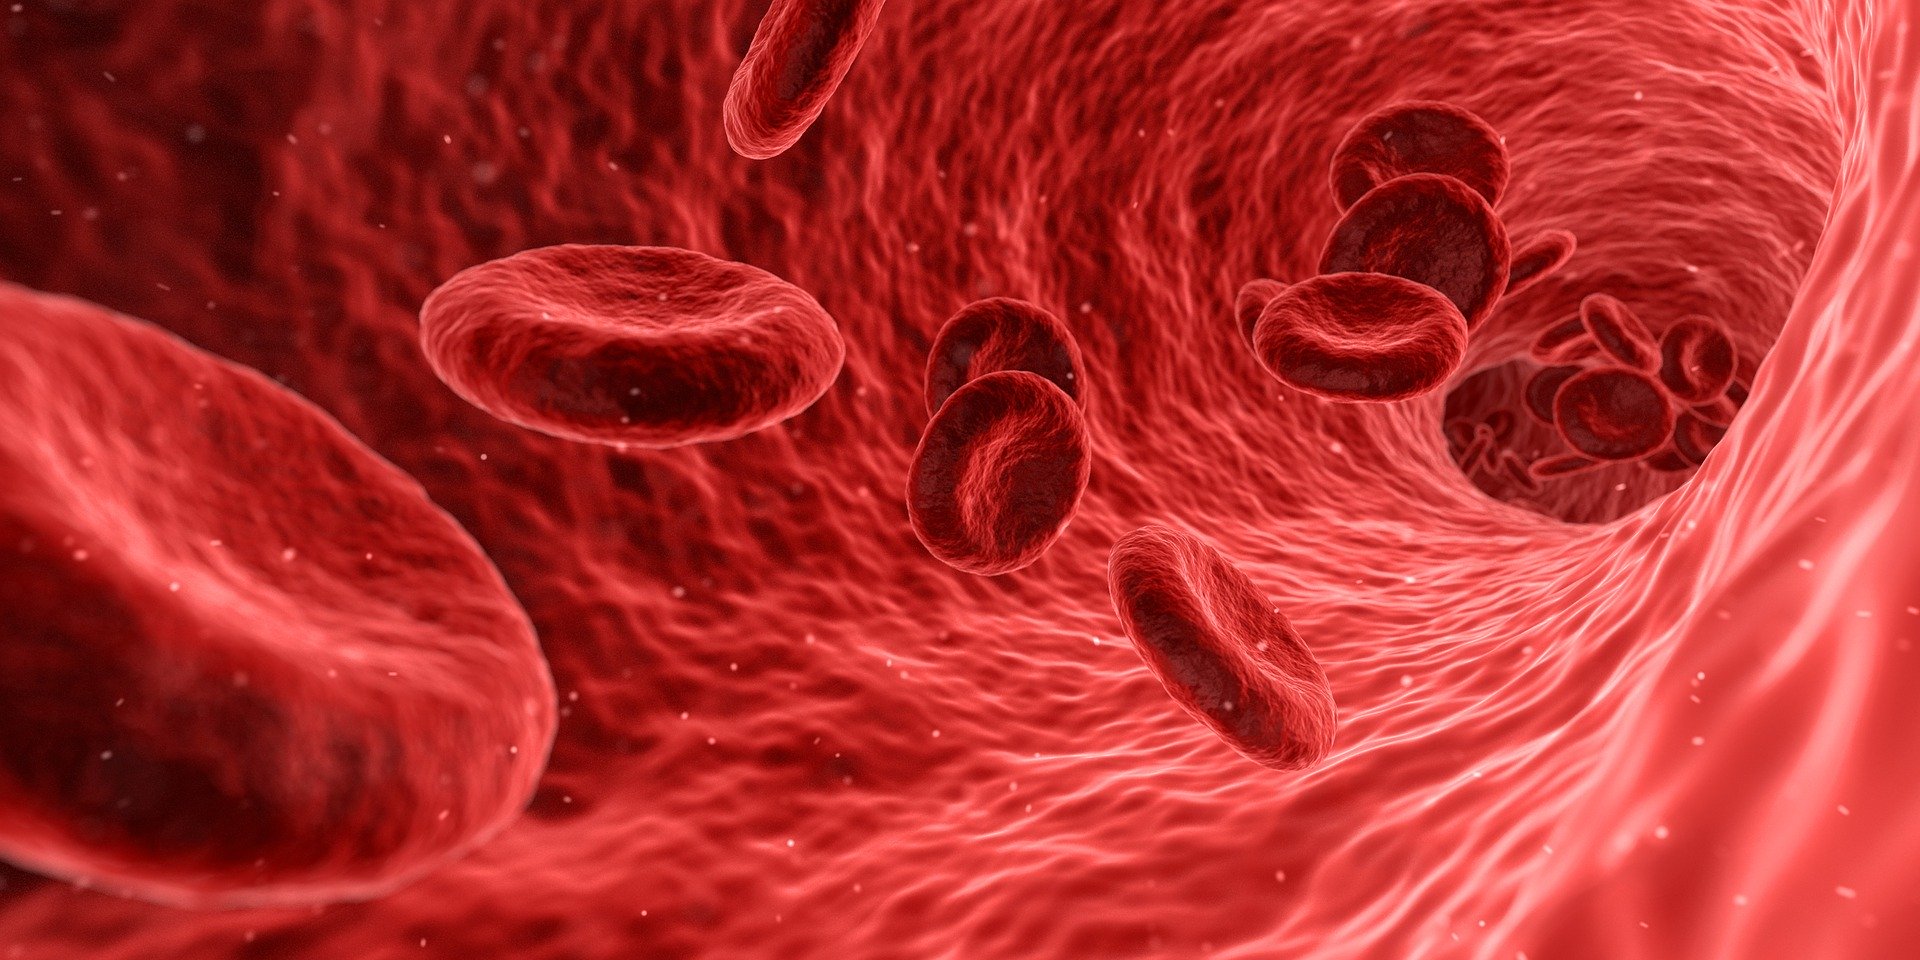 Red cells in the bloodstream. Image by Arek Socha from Pixabay.